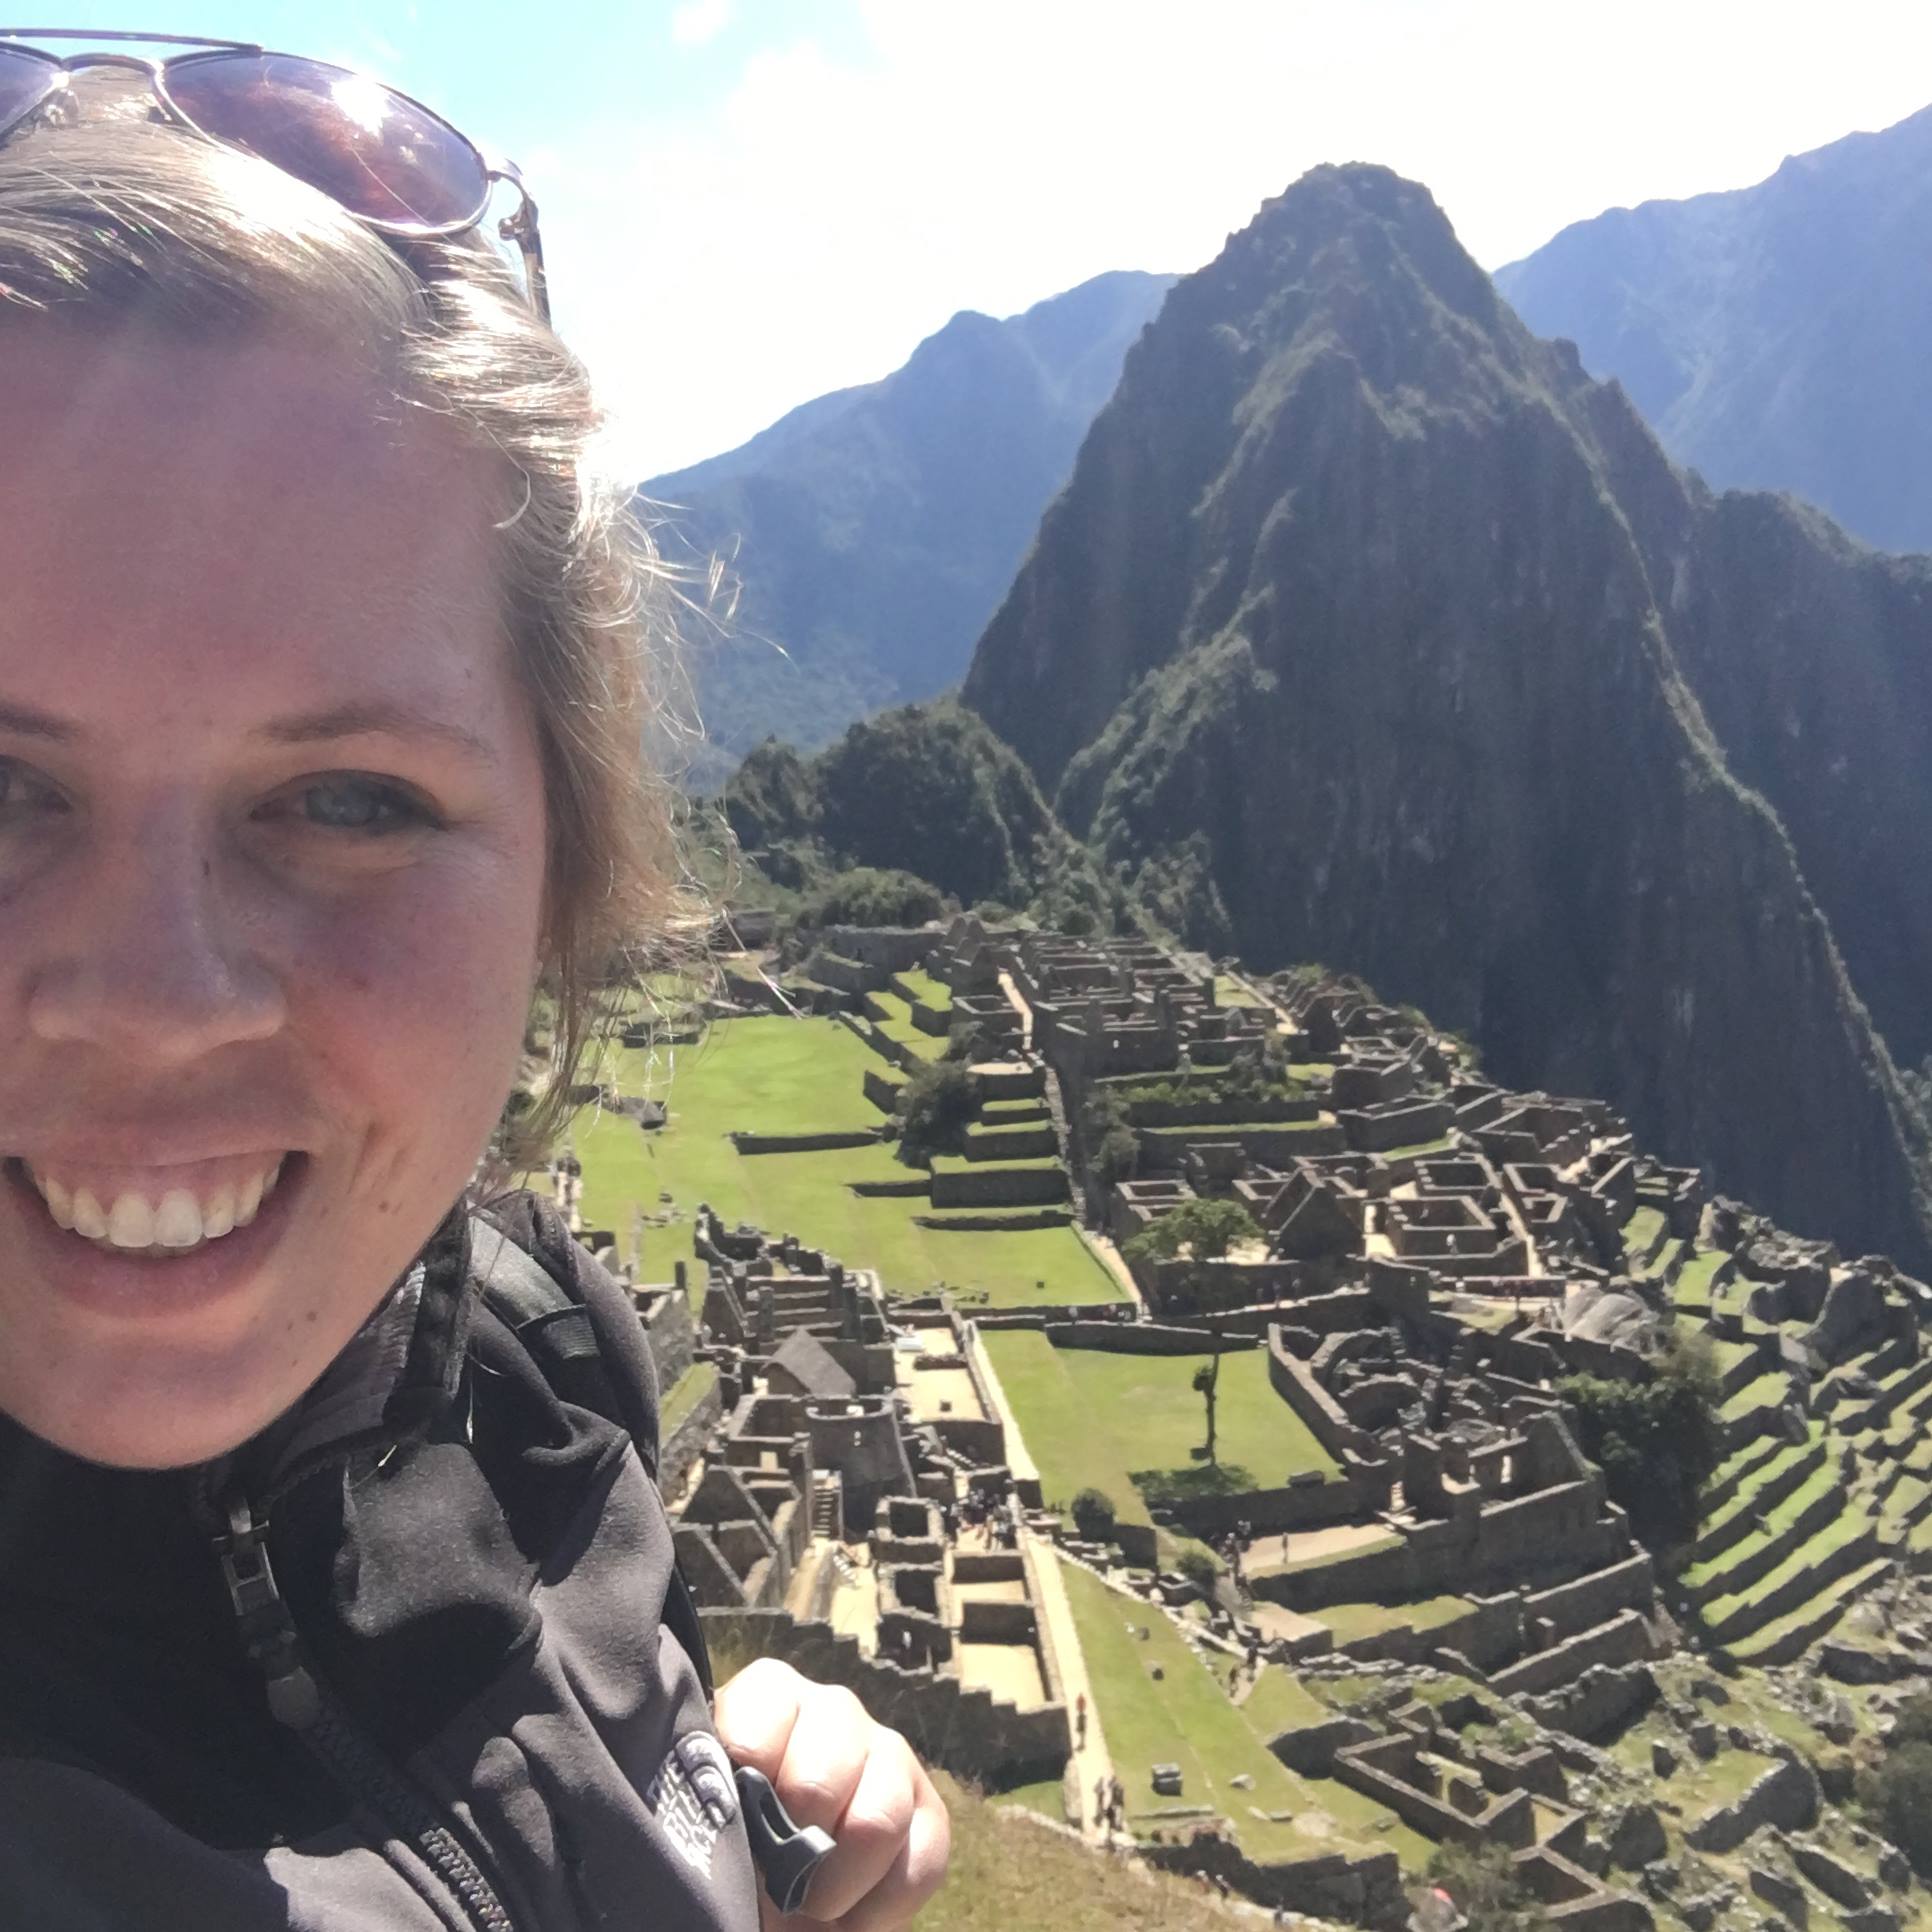 COC employee Kathryn on vacation in South America.